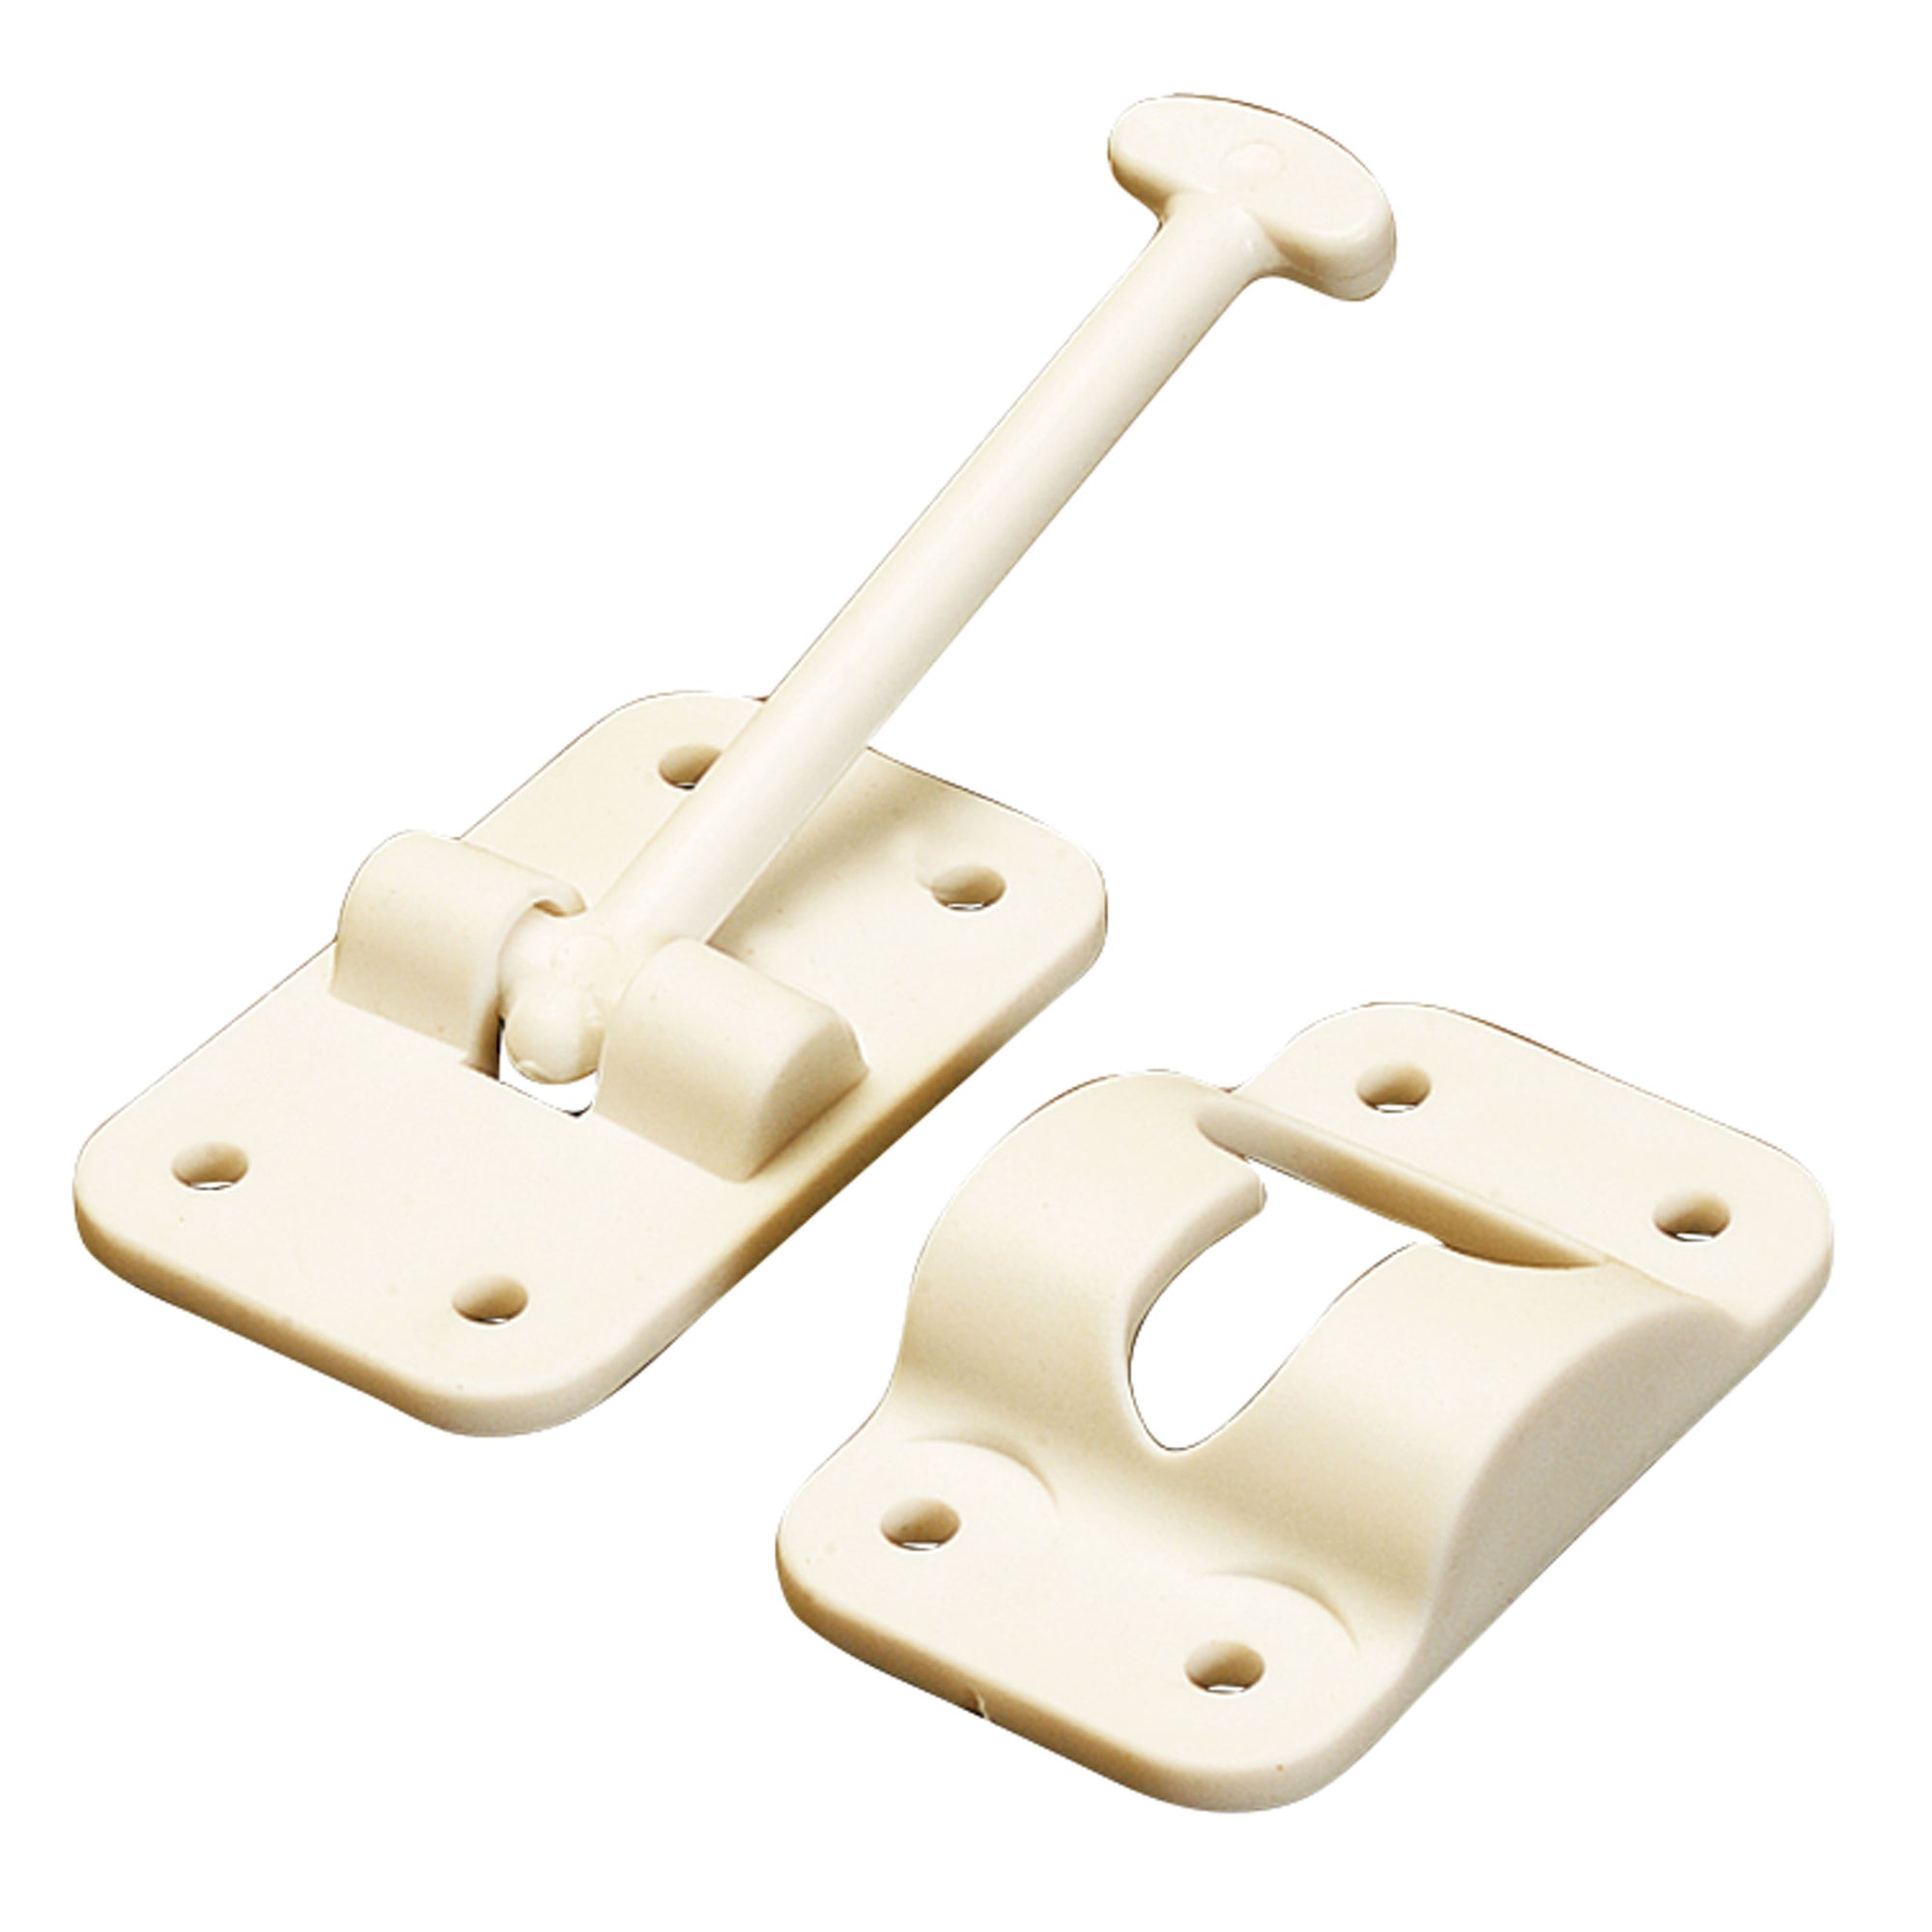 AP Products 013-084 Plastic Door Holdback - 3-1/2", Colonial White